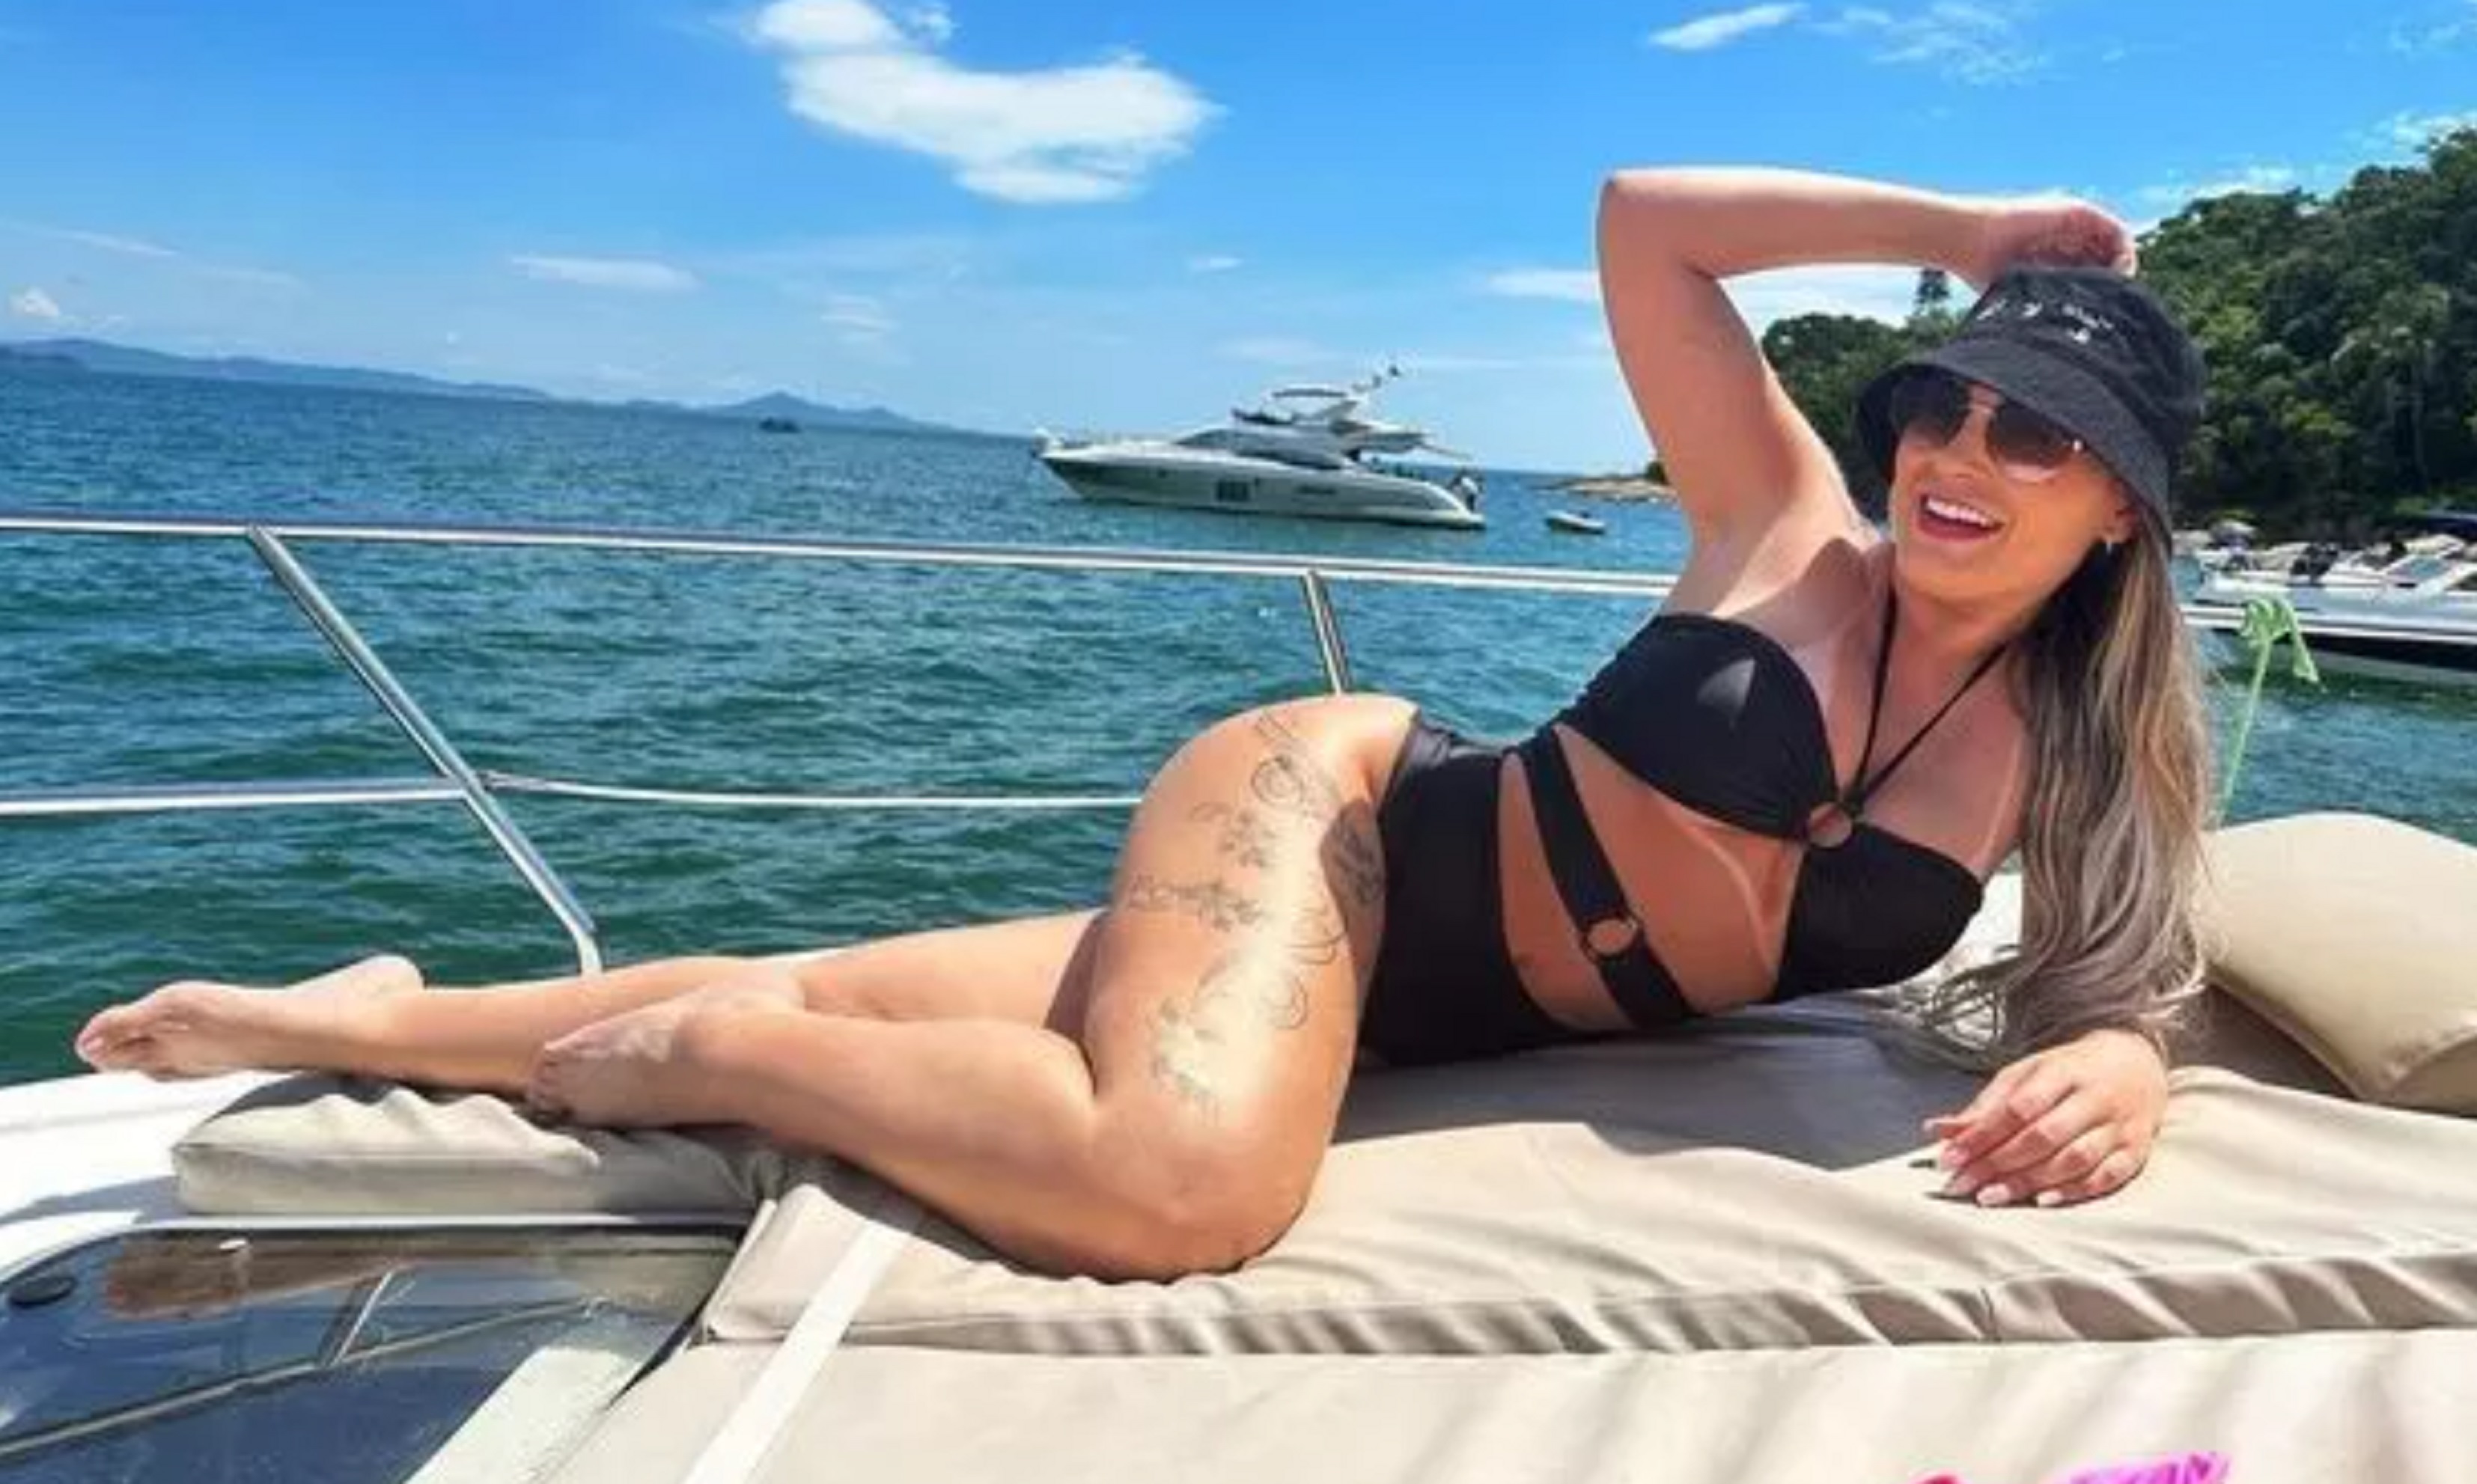 3309px x 1983px - Son of OnlyFans star Andressa Urach admits he films her content